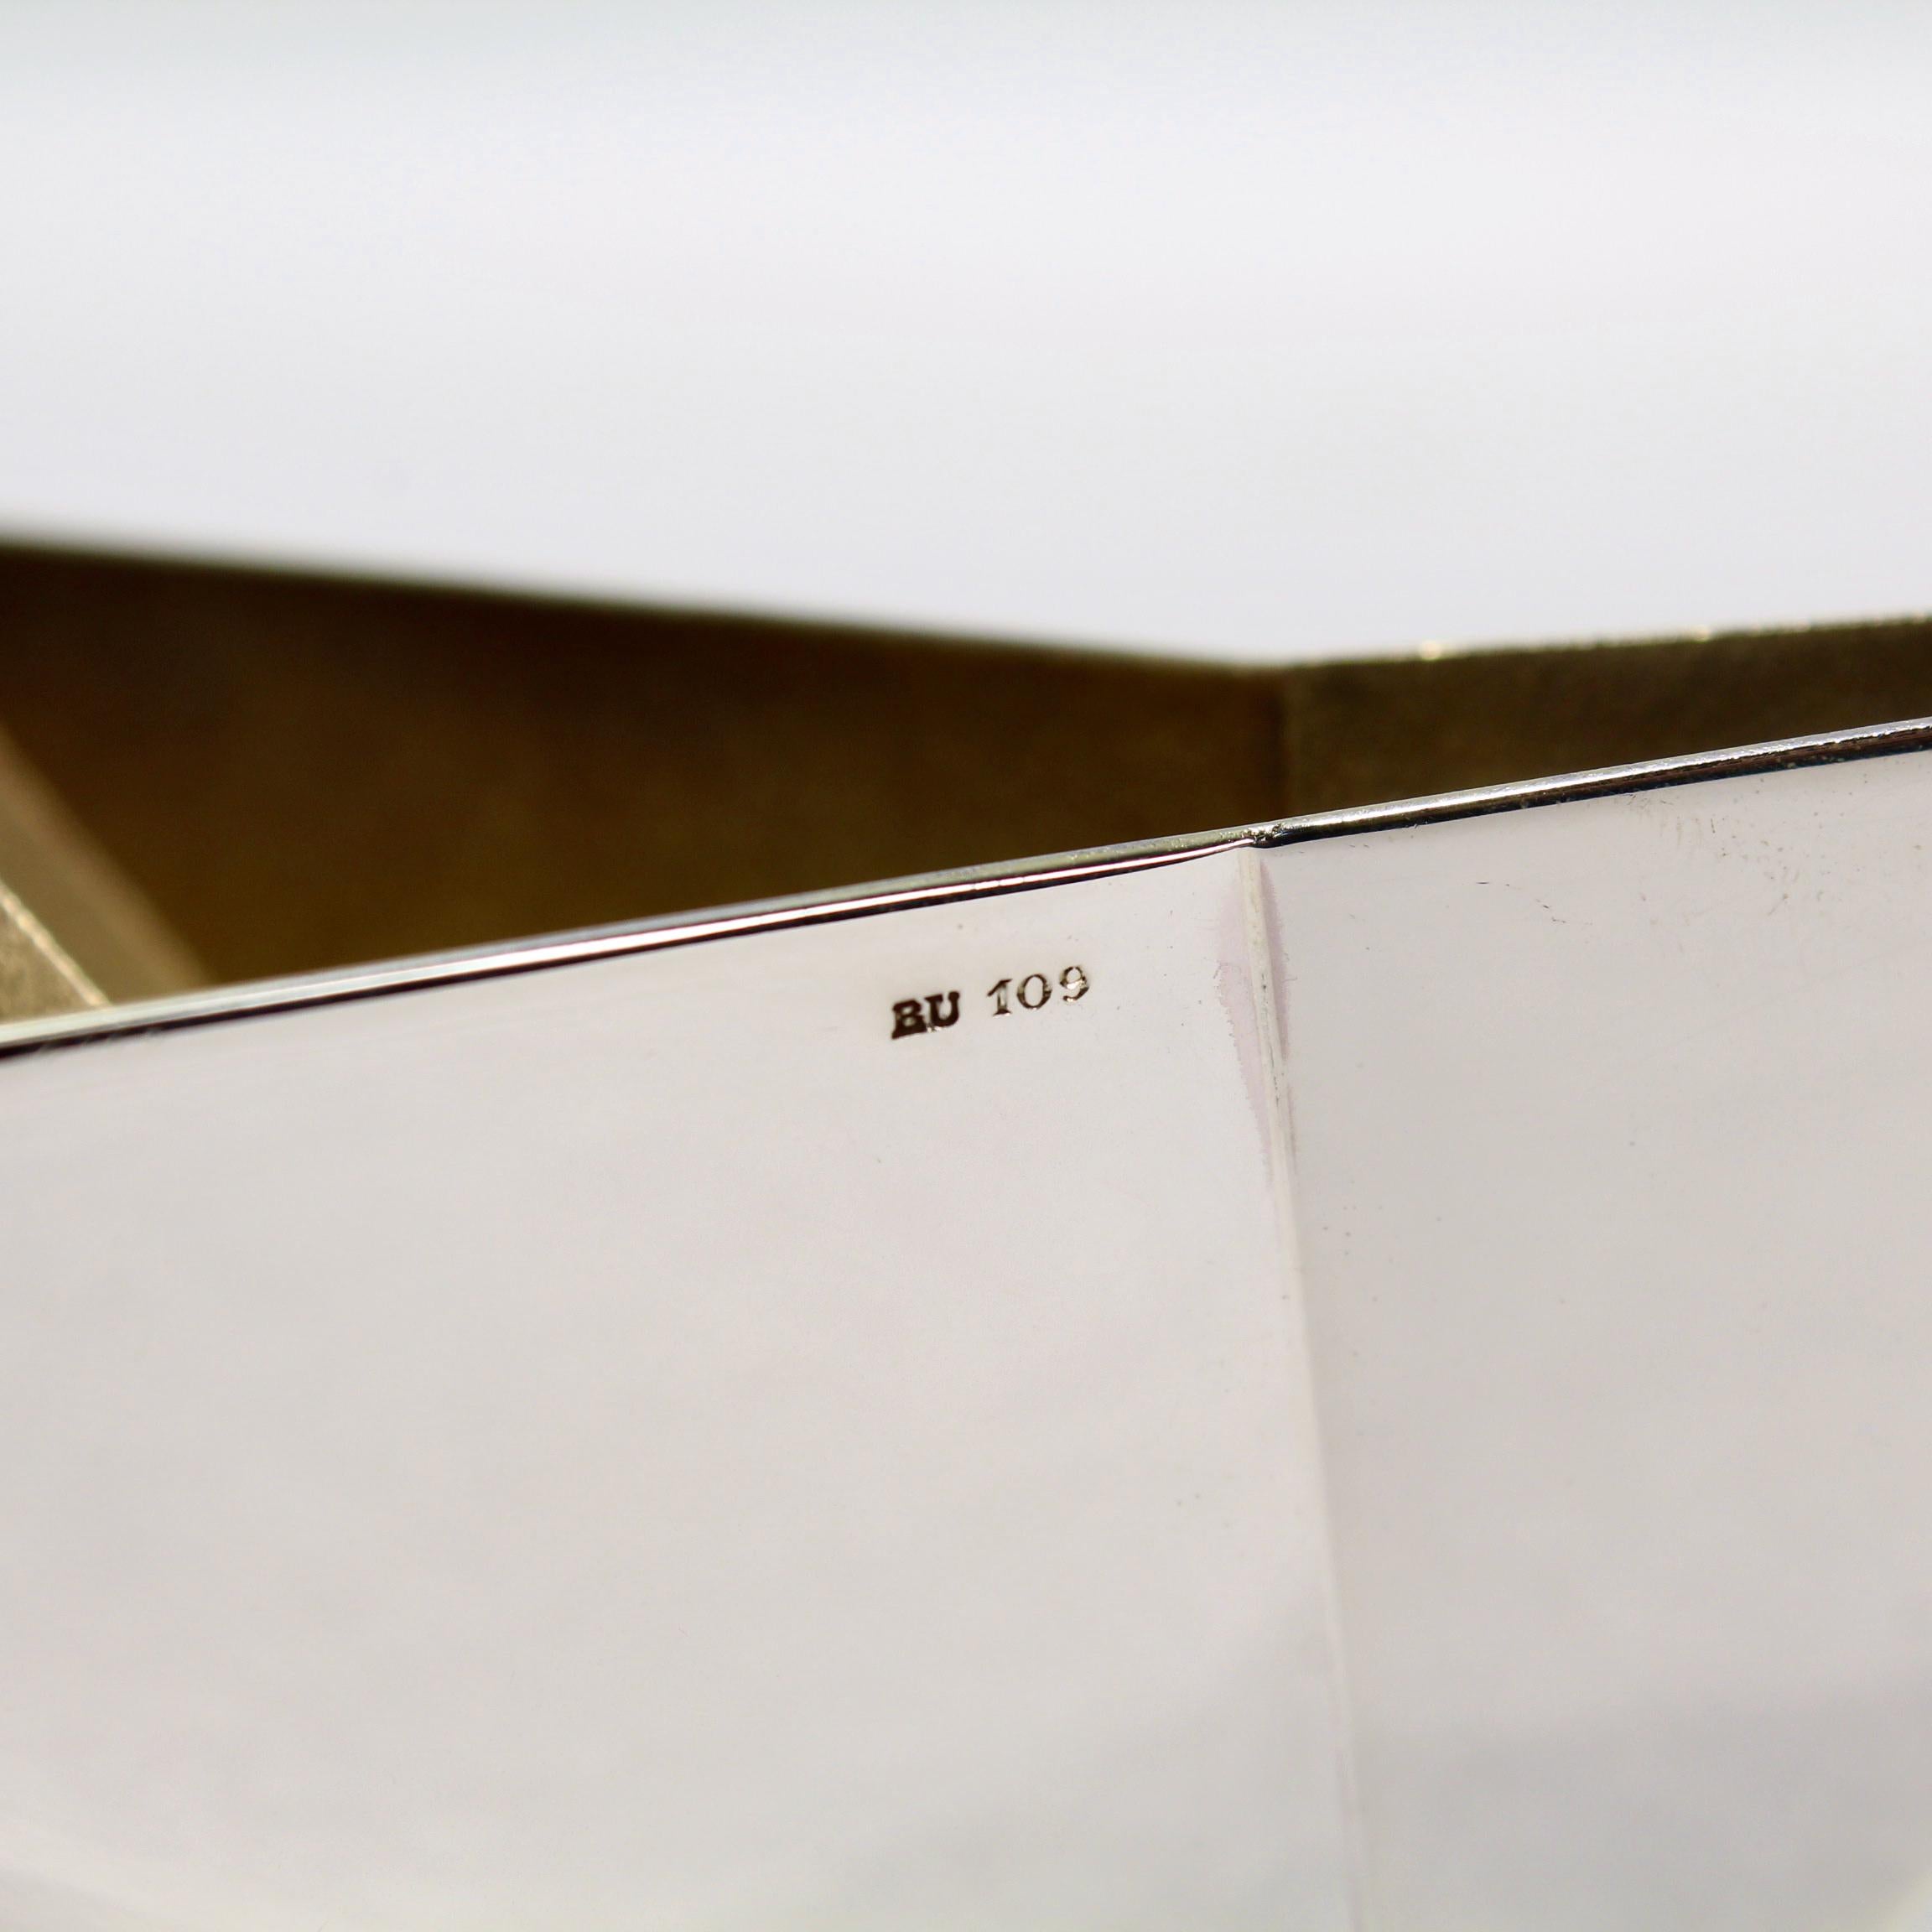 A very fine Bulgari sterling silver paperweight.

In the form of an origami folded paper boat.

With a smooth exterior and gilded, stippled interior.

An example of this rare form was included in the 2013 San Francisco Museum of Art's retrospective